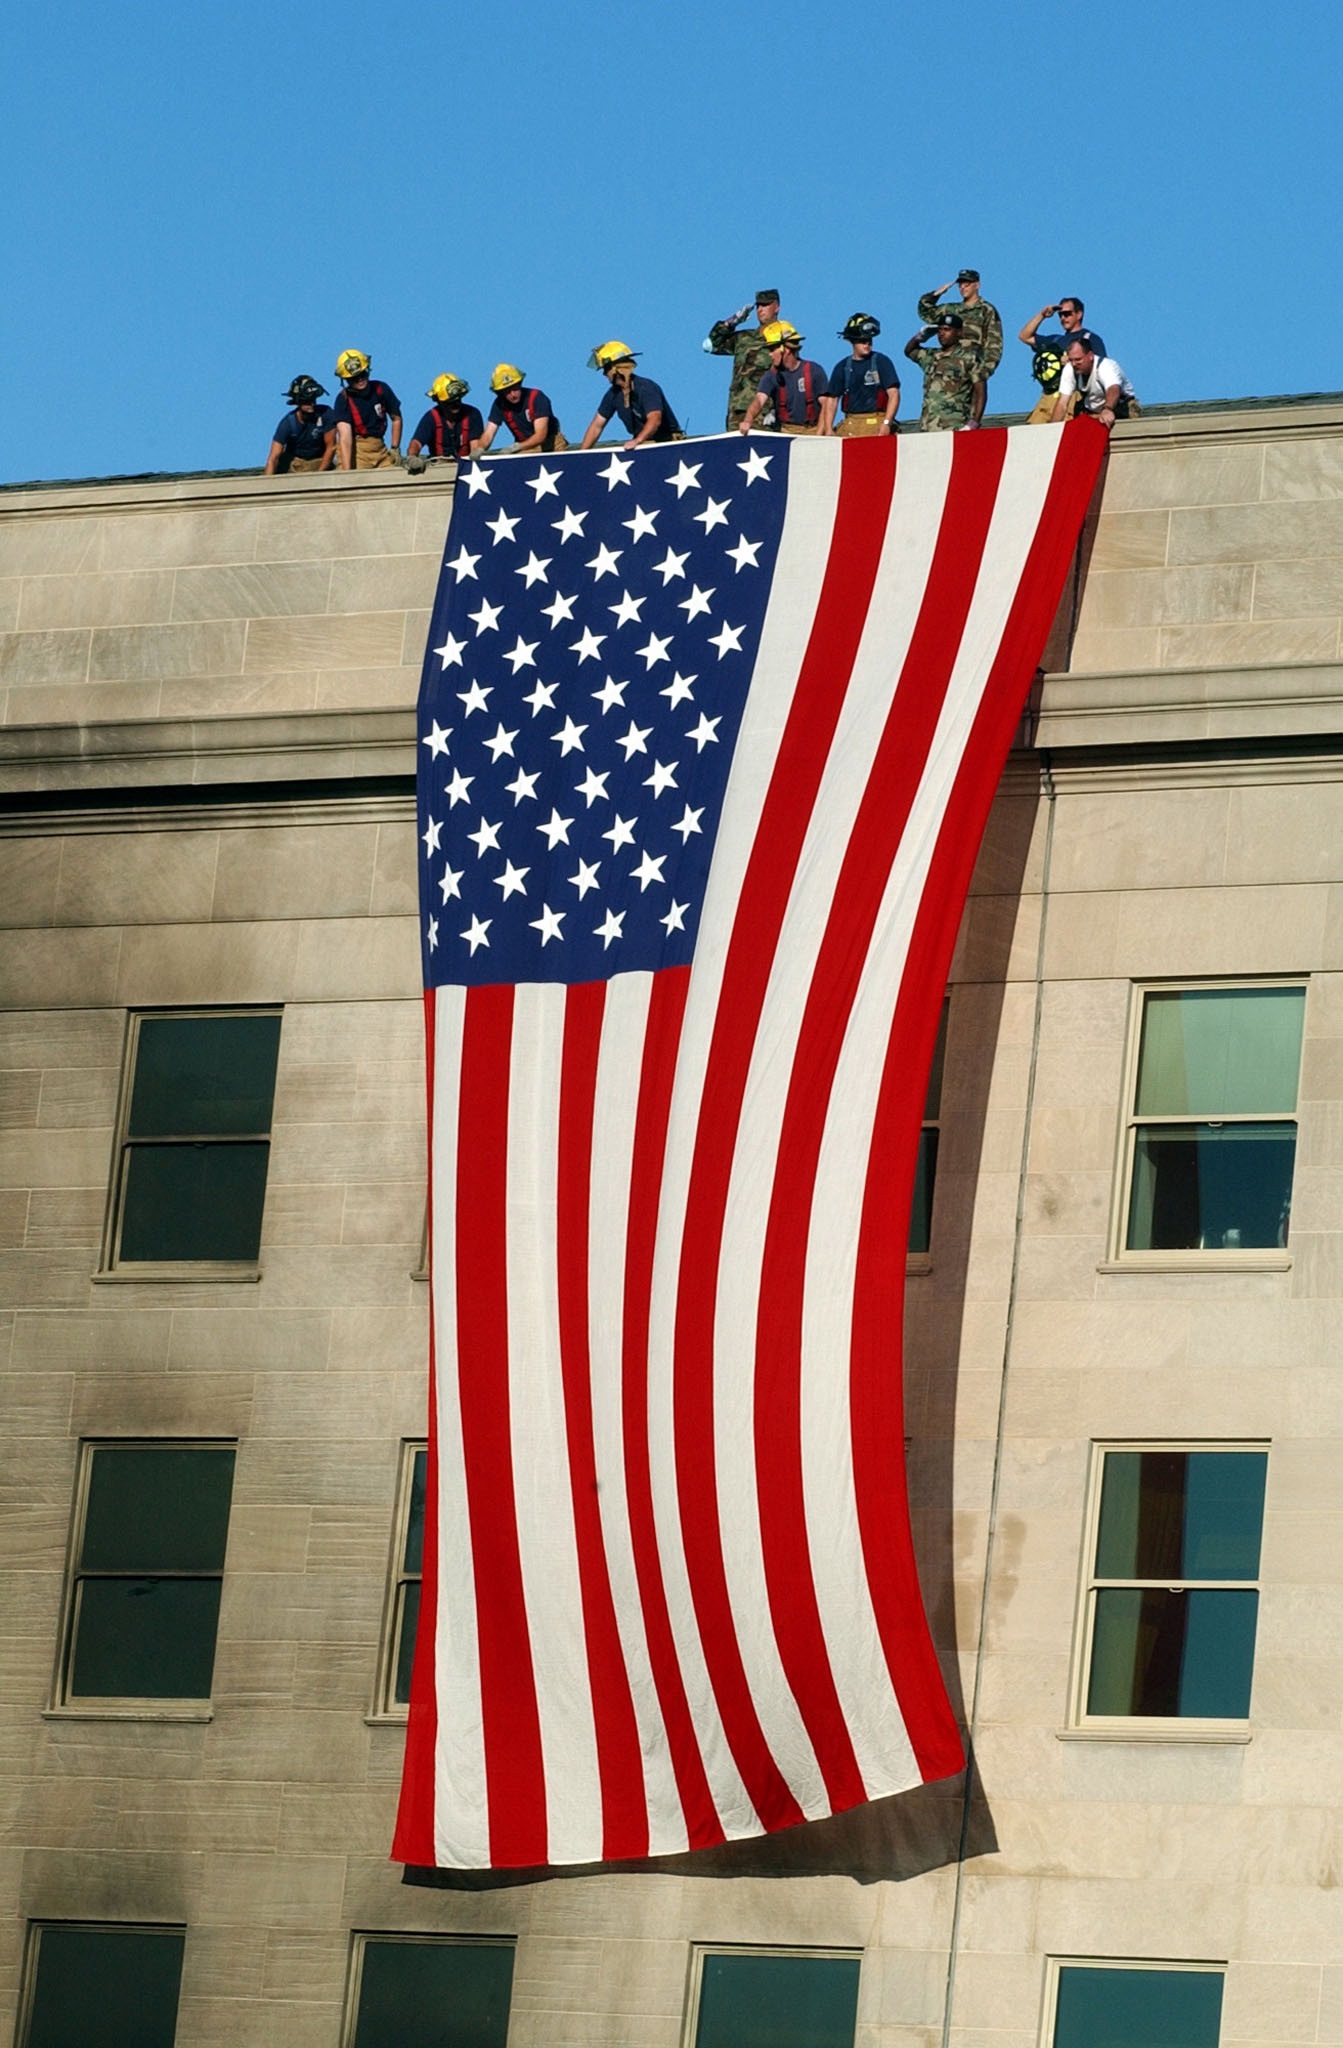 Military service members salute as fire and rescue workers unfurl a huge American flag over the side of the Pentagon, Sept. 12, 2001, during rescue and recovery efforts following the 9/11 terrorist attack. At about 9:40 a.m., a hijacked commercial airliner, originating from Washington’s Dulles airport, was flown into the south side of the building. Navy photo by Petty Officer 1st Class Michael W. Pendergrass